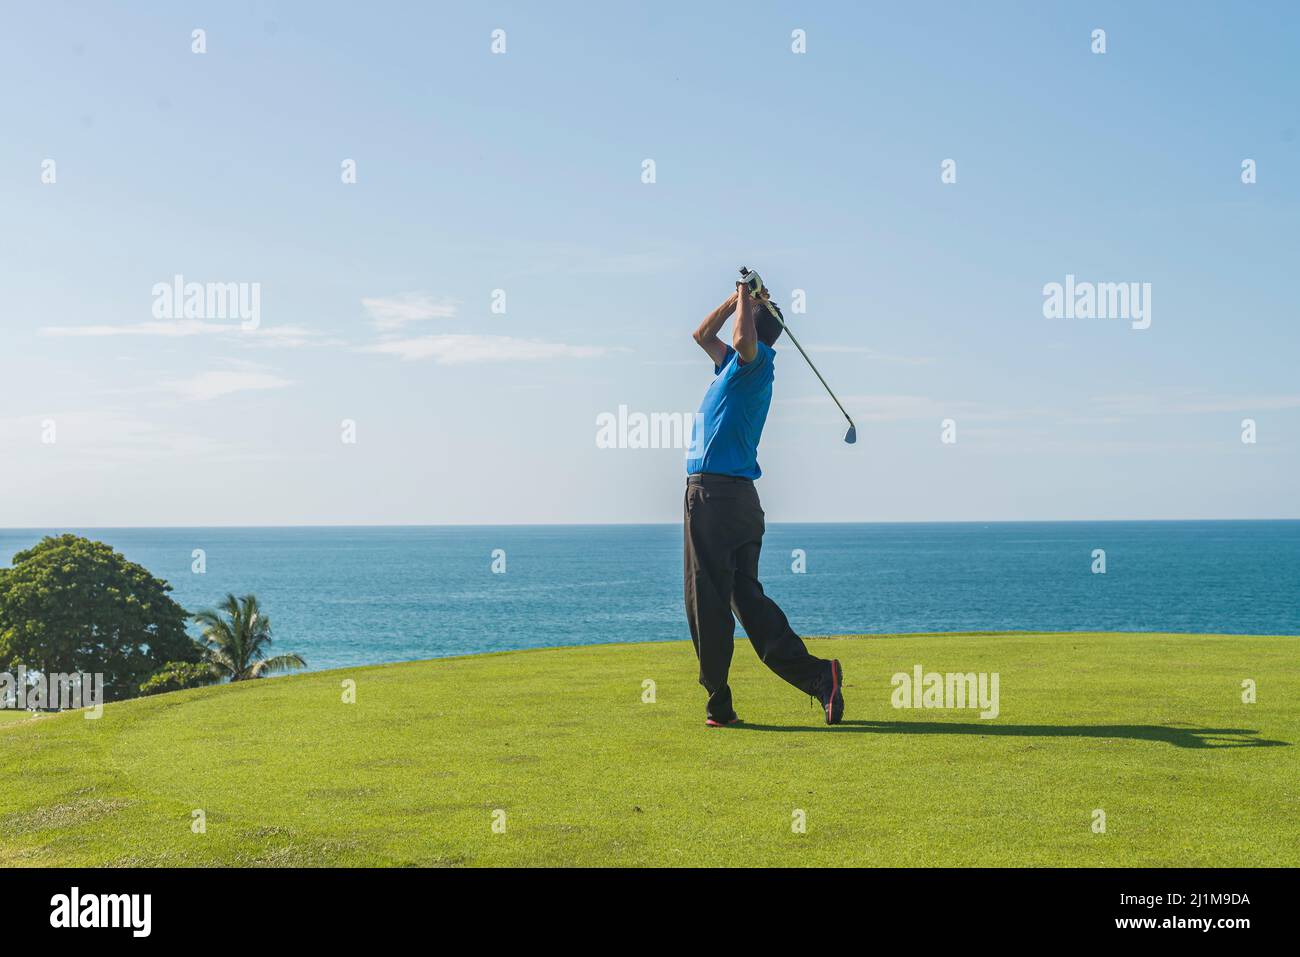 Latin golf instructor practicing his swing Stock Photo